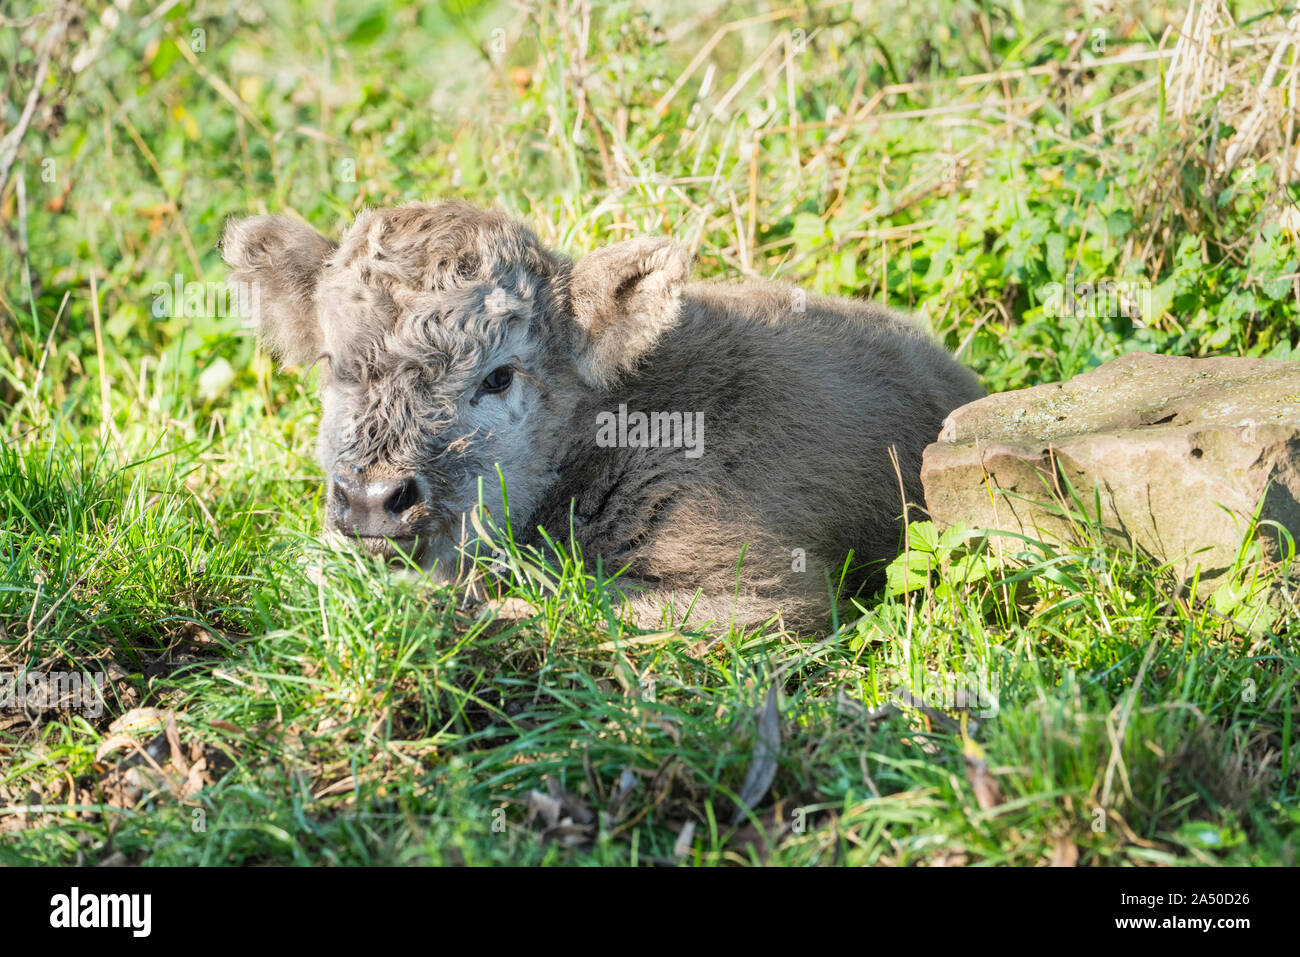 Highland cattle, young calf Stock Photo